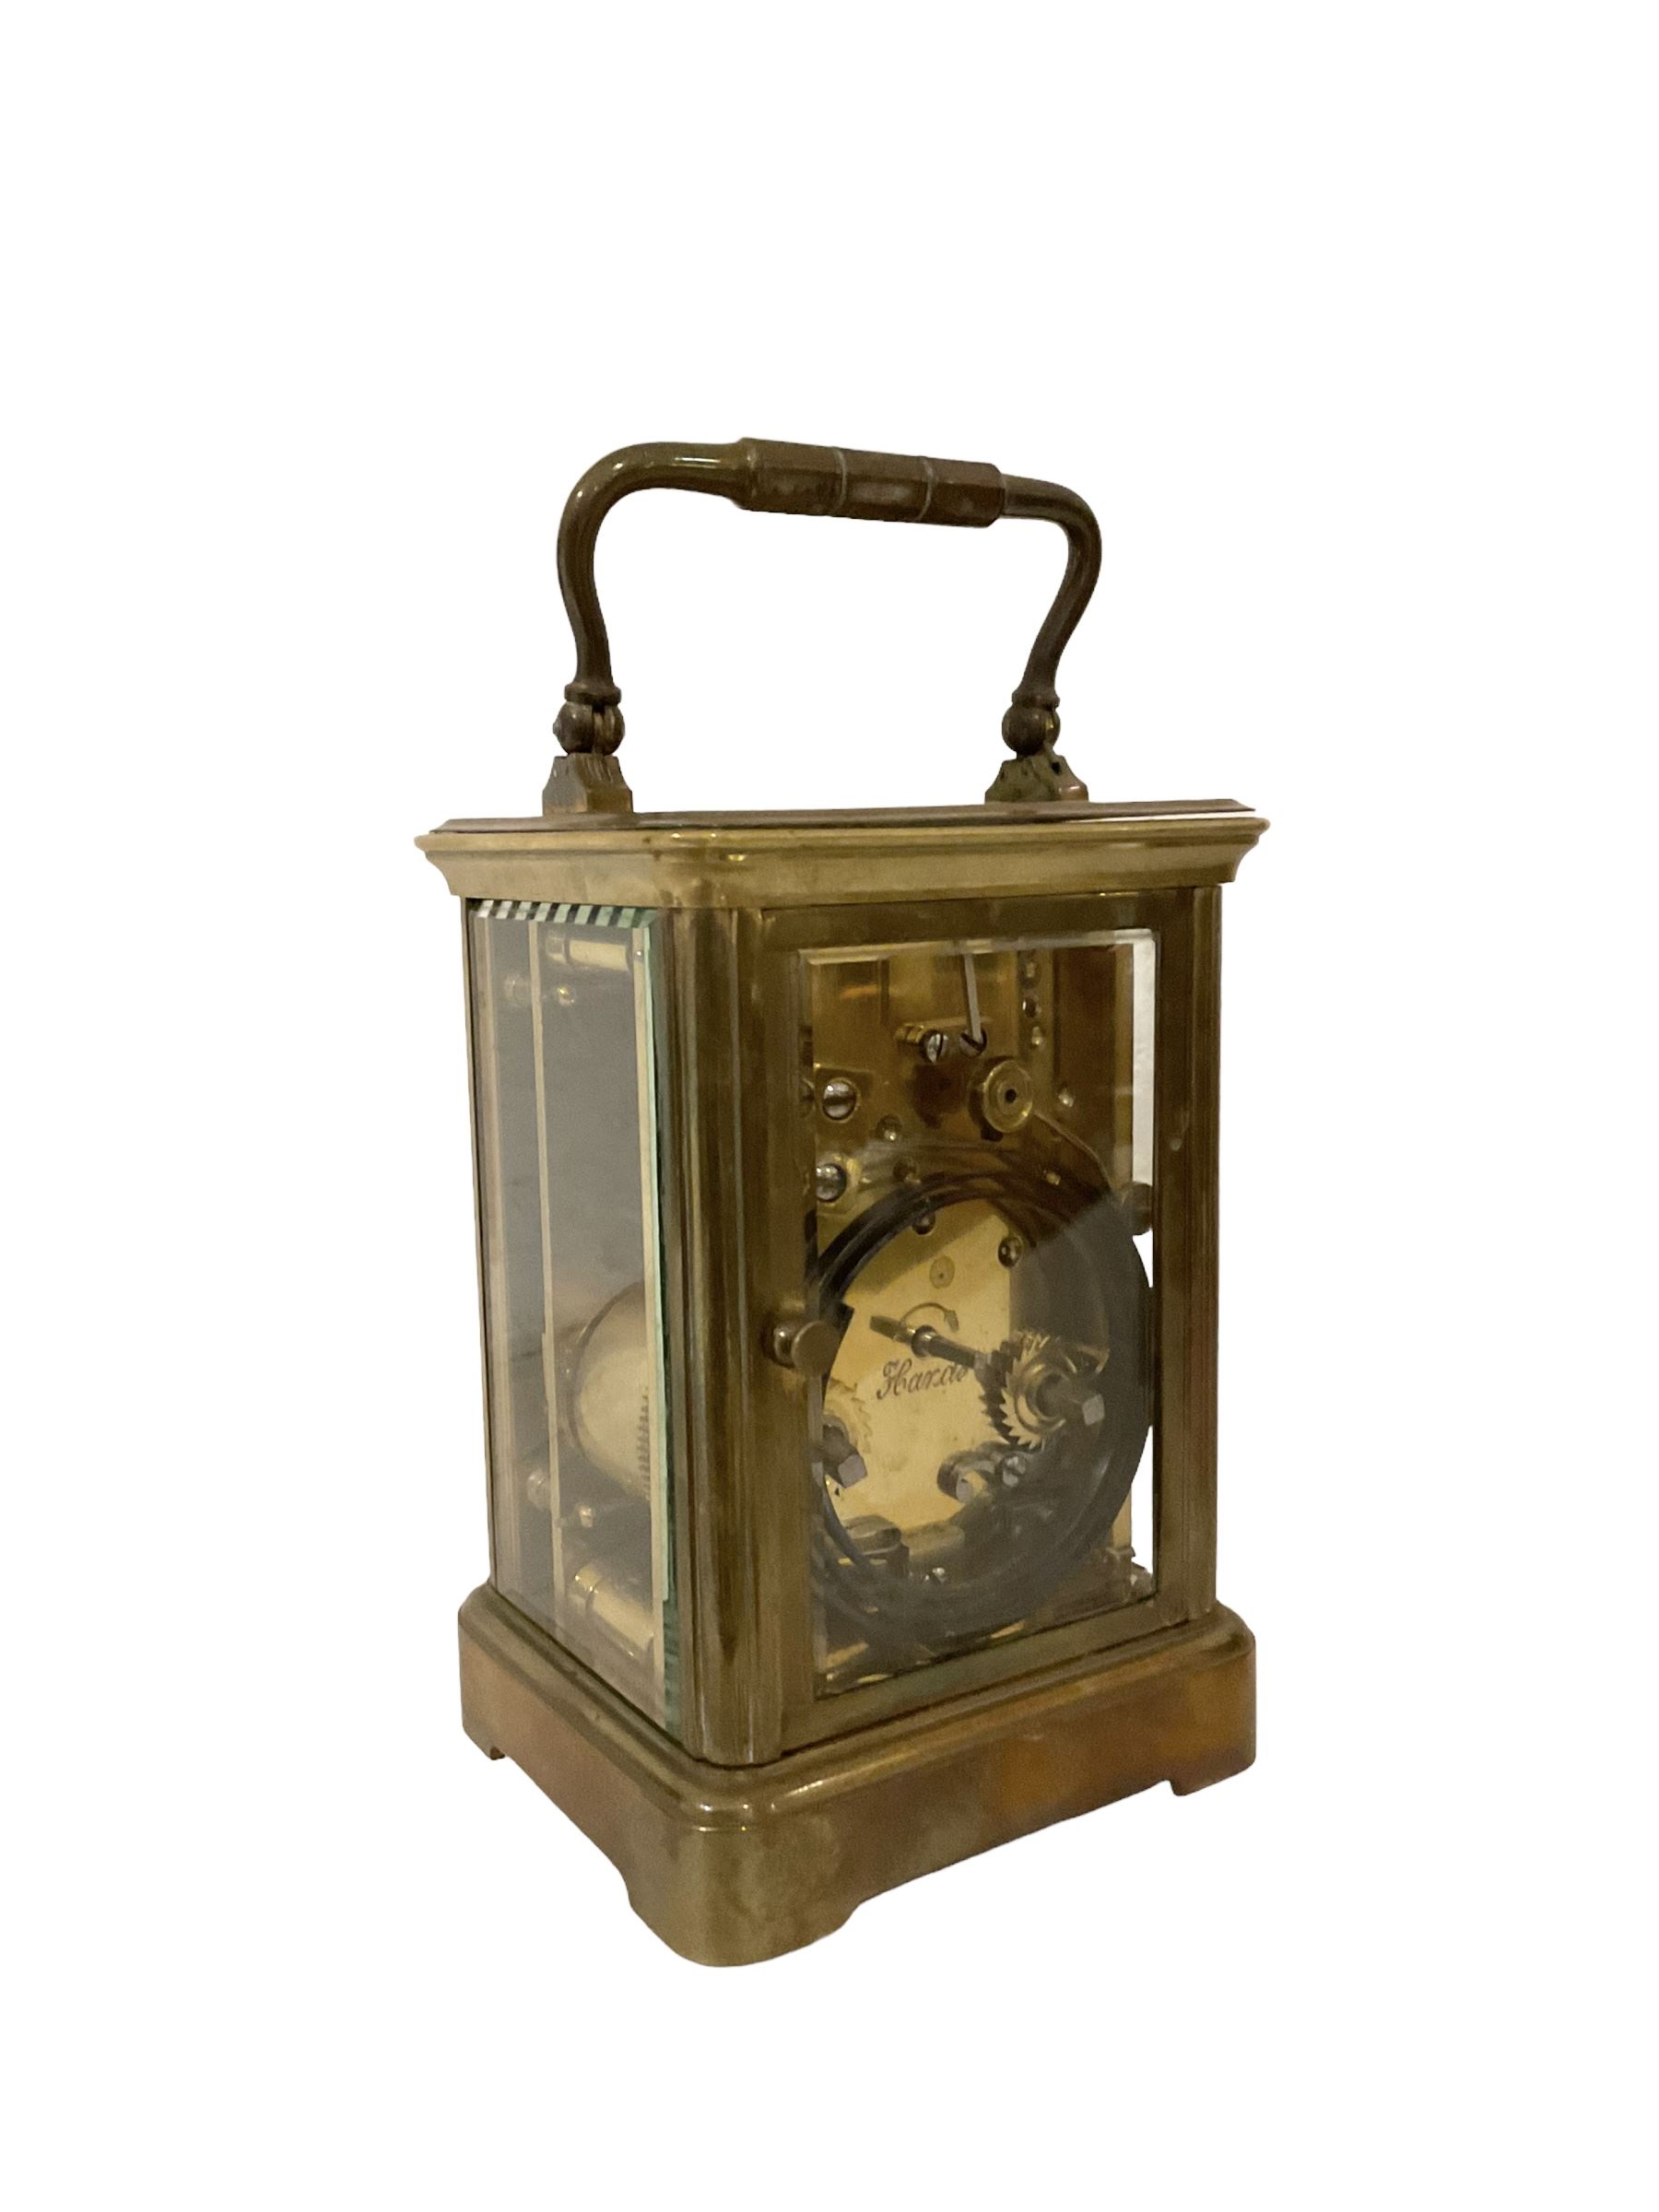 French - 8-day early 20th-century striking carriage clock and an Edwardian timepiece clock. Carriage - Image 3 of 6